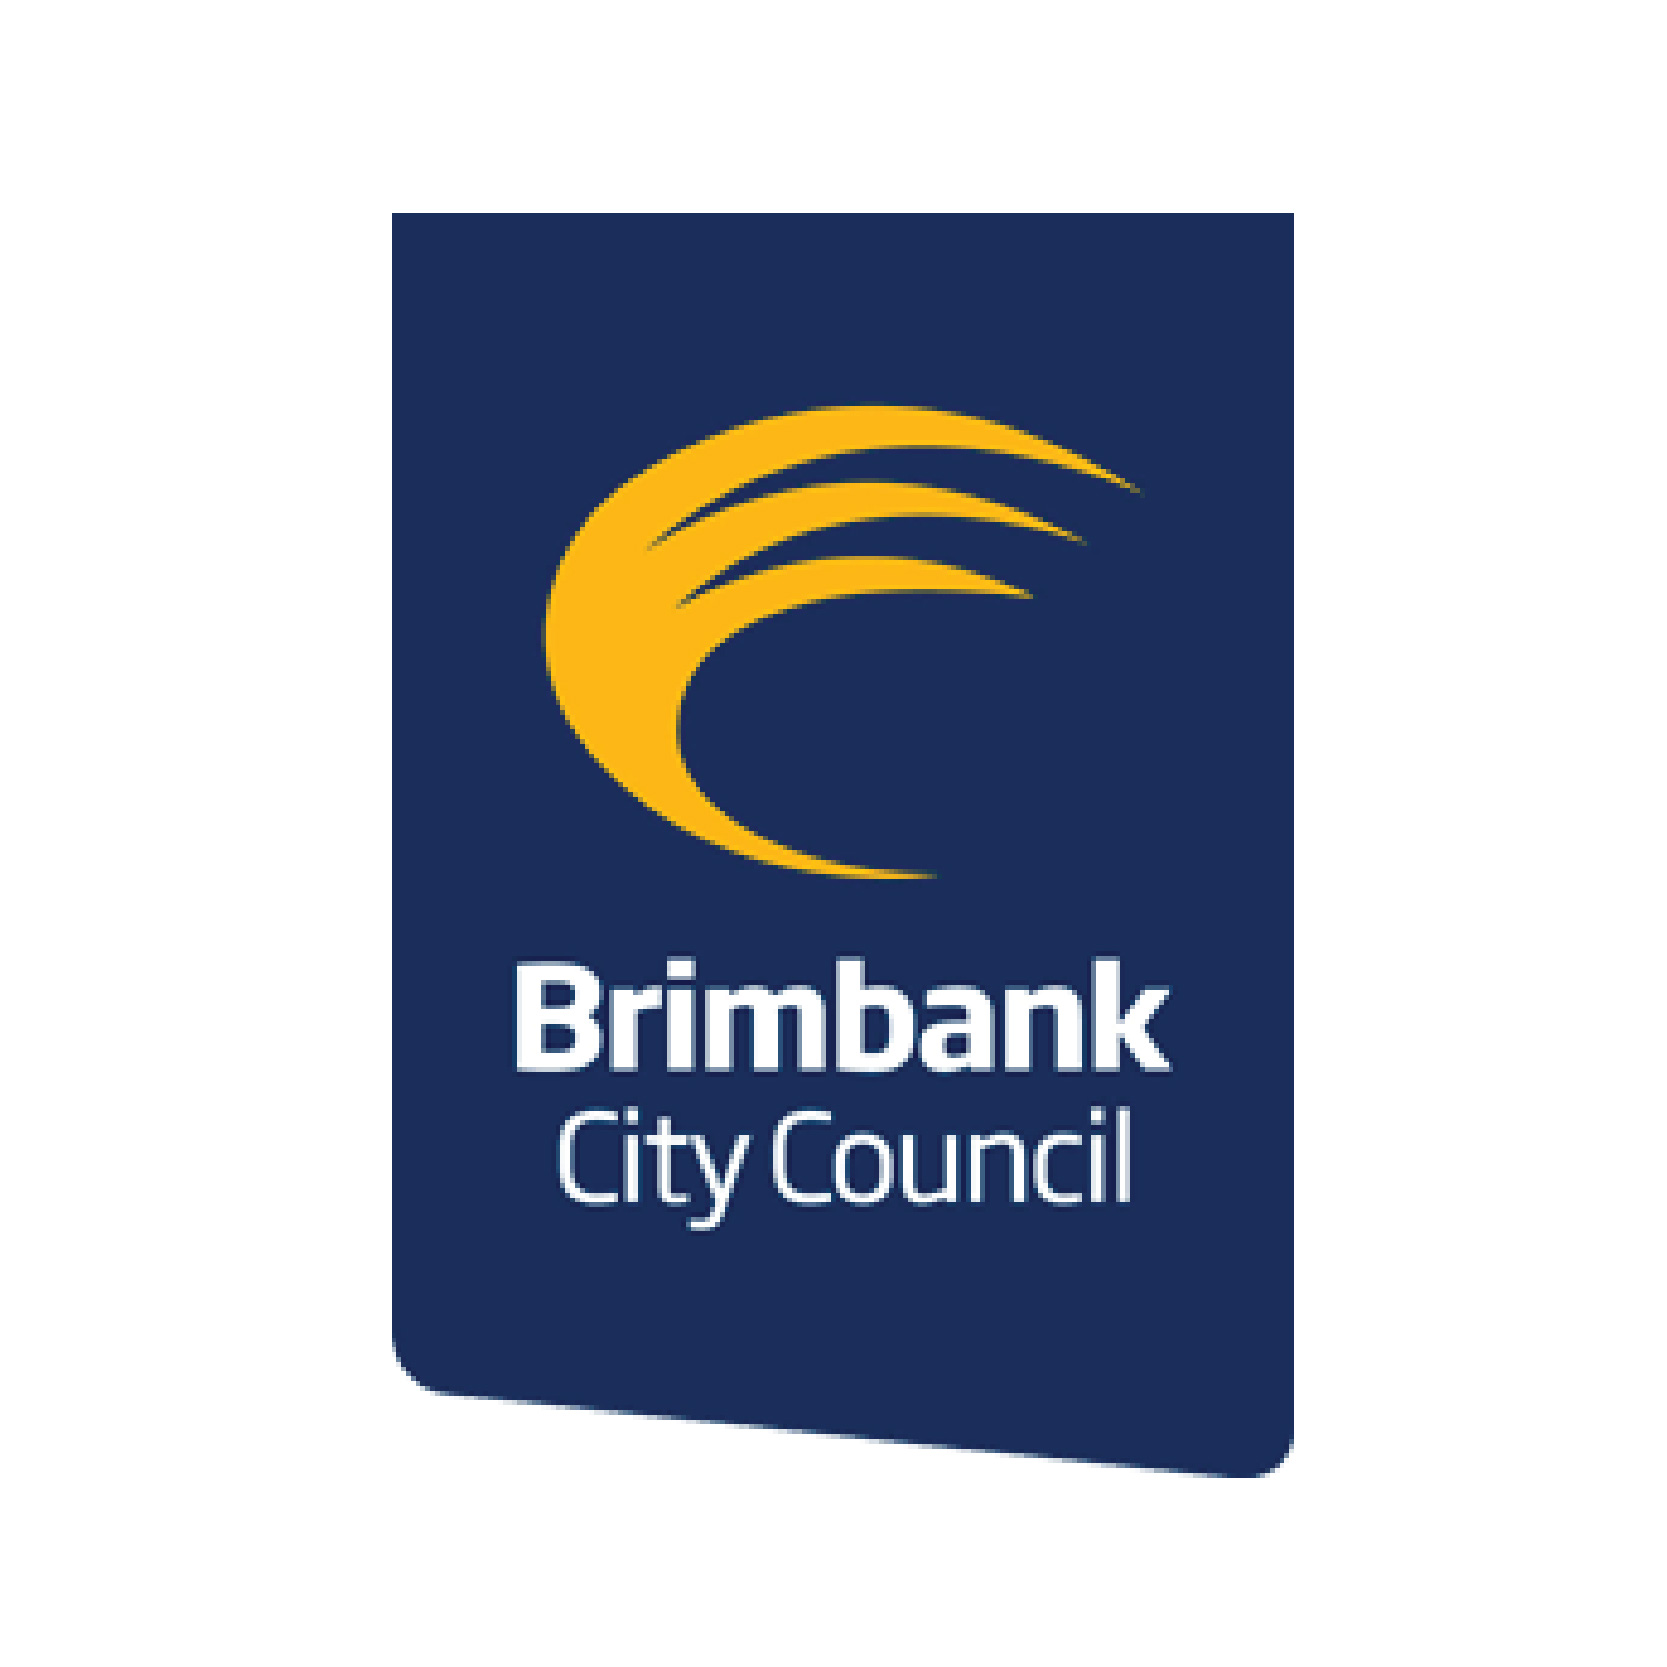 Our clients&nbsp;include household Australian names&nbsp;such as Brimbank City Council.